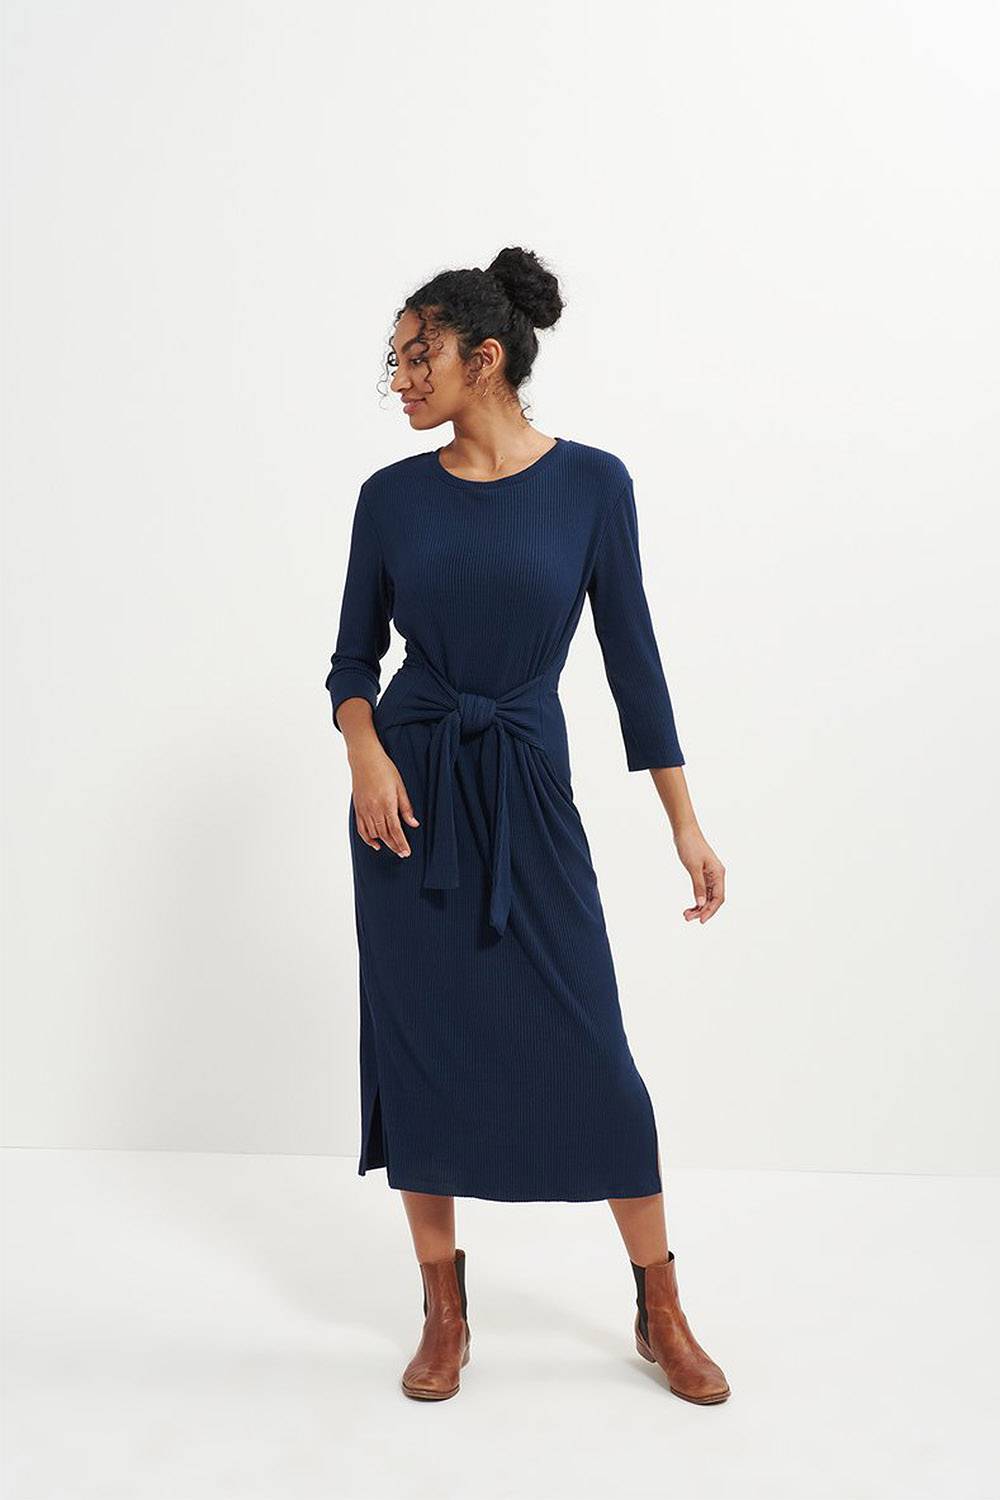 20 Best Affordable, Ethical, Minimalist Clothing Brands | Panaprium